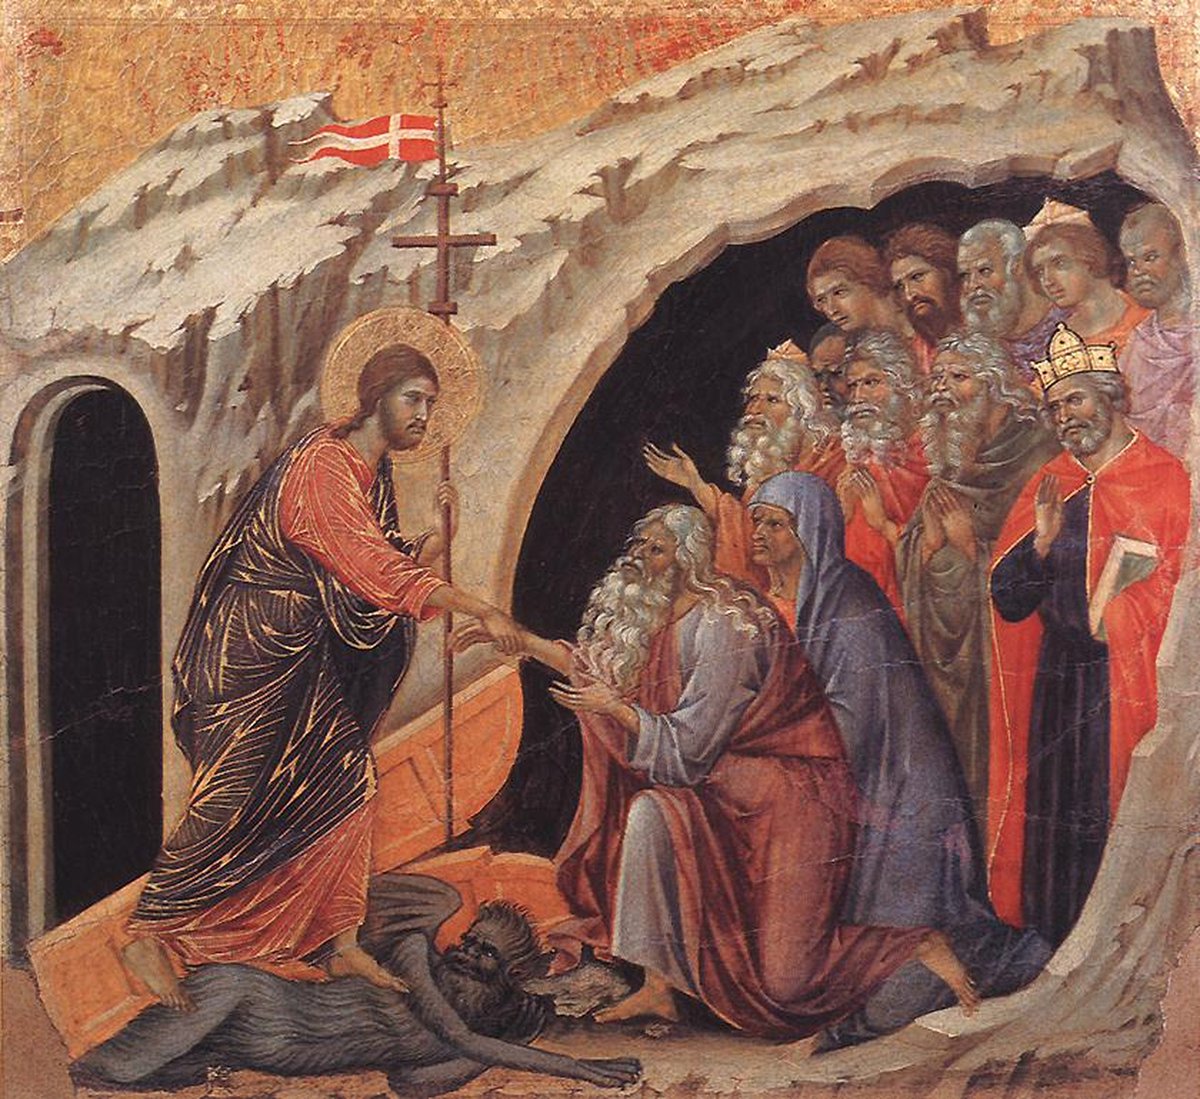 Blessed Resurrection to all my European friends! Christ is Risen!